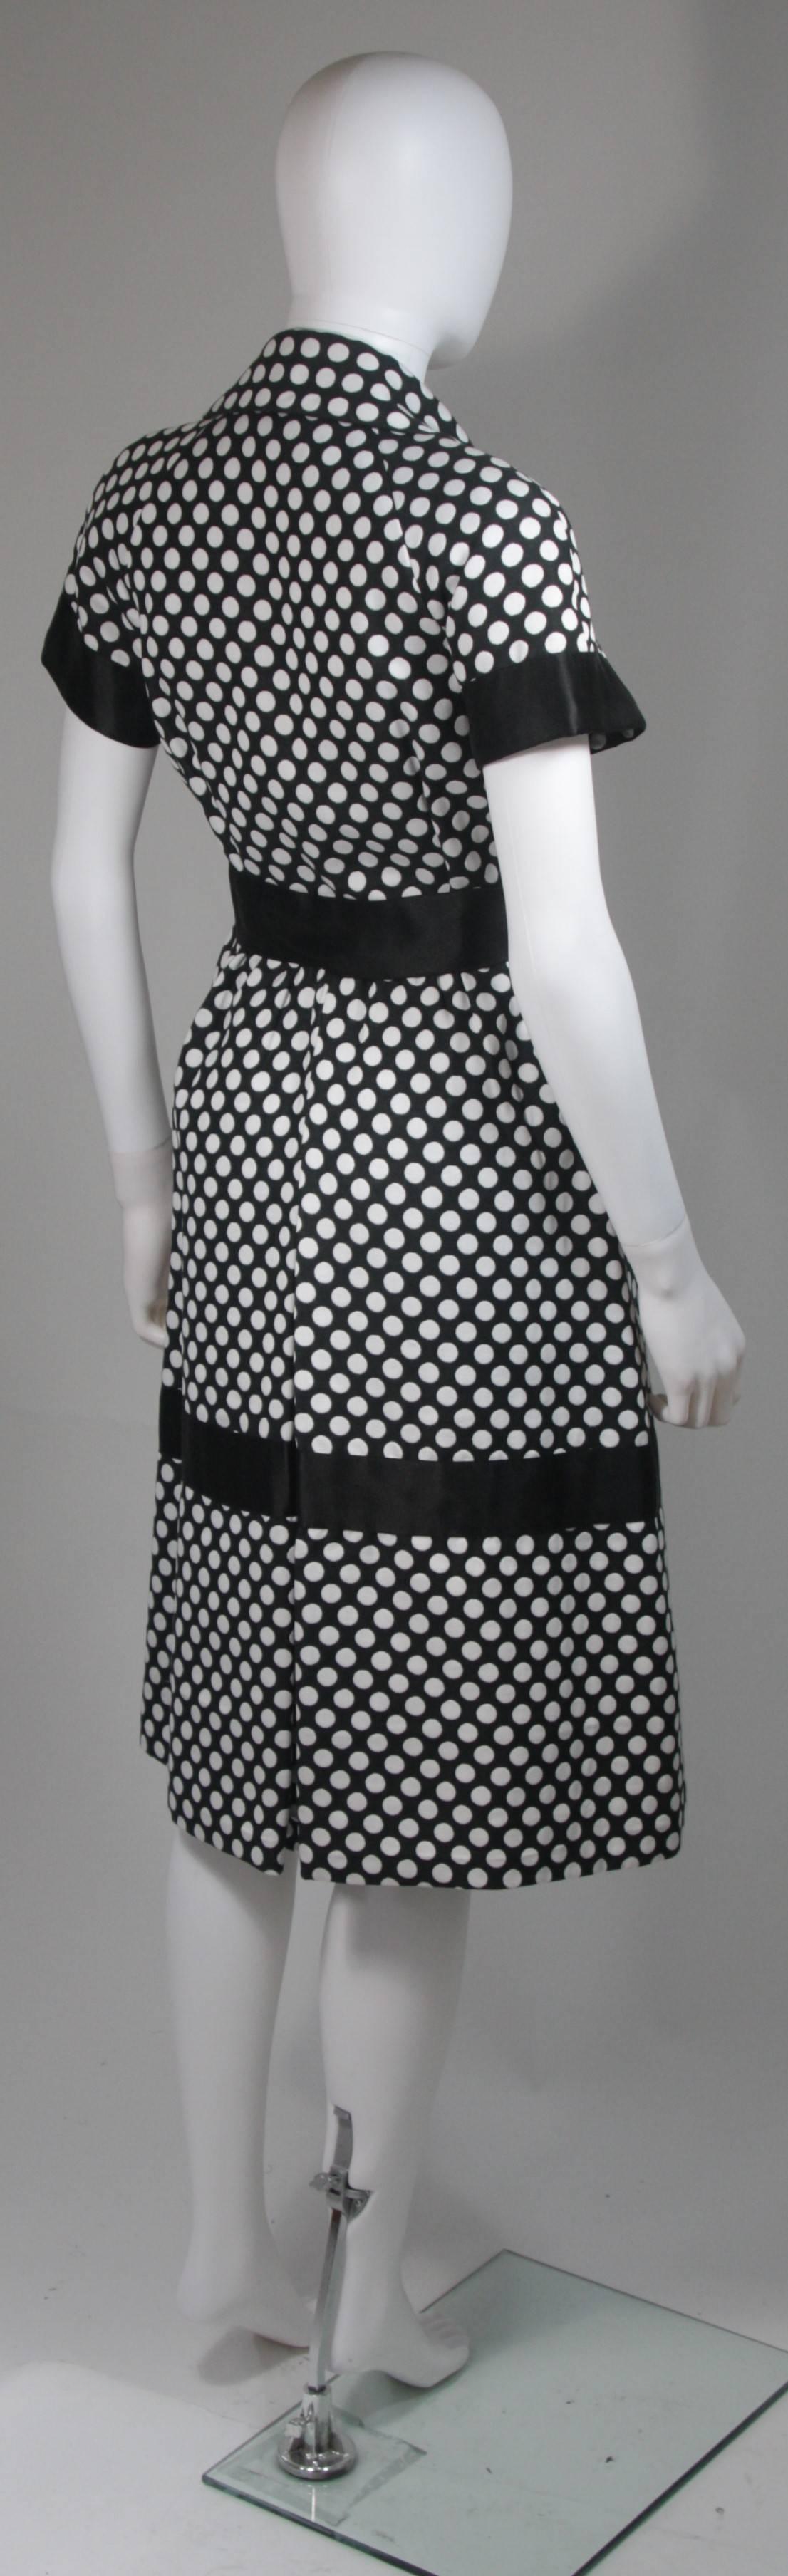 Geoffrey Beene Black and White Polka Dot Dress with Satin Trim Size Small 4